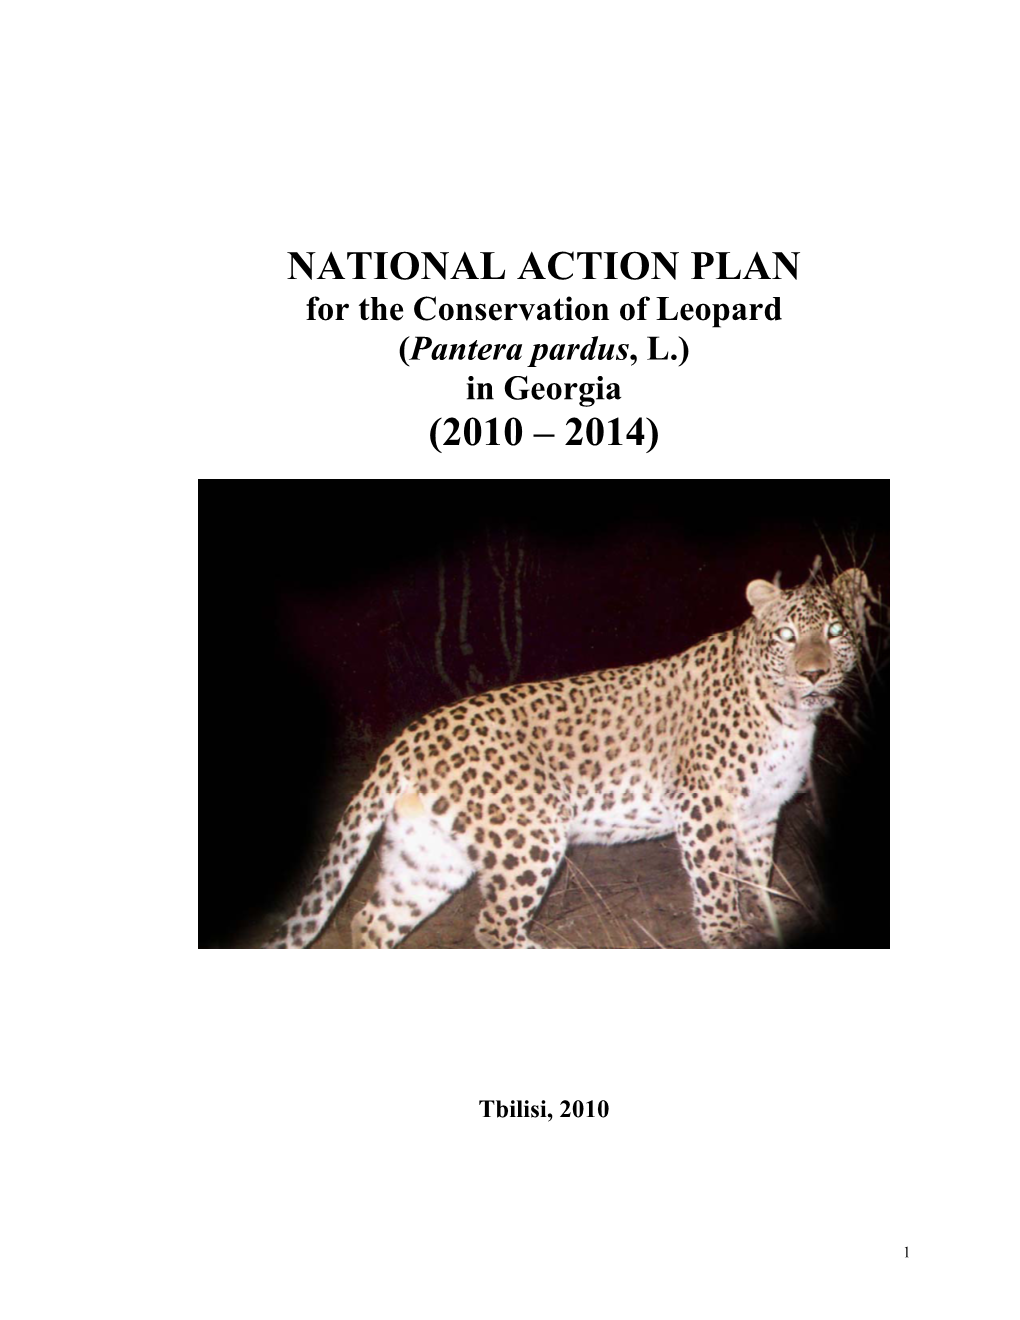 NATIONAL ACTION PLAN for the Conservation of Leopard (Pantera Pardus, L.) in Georgia (2010 – 2014)